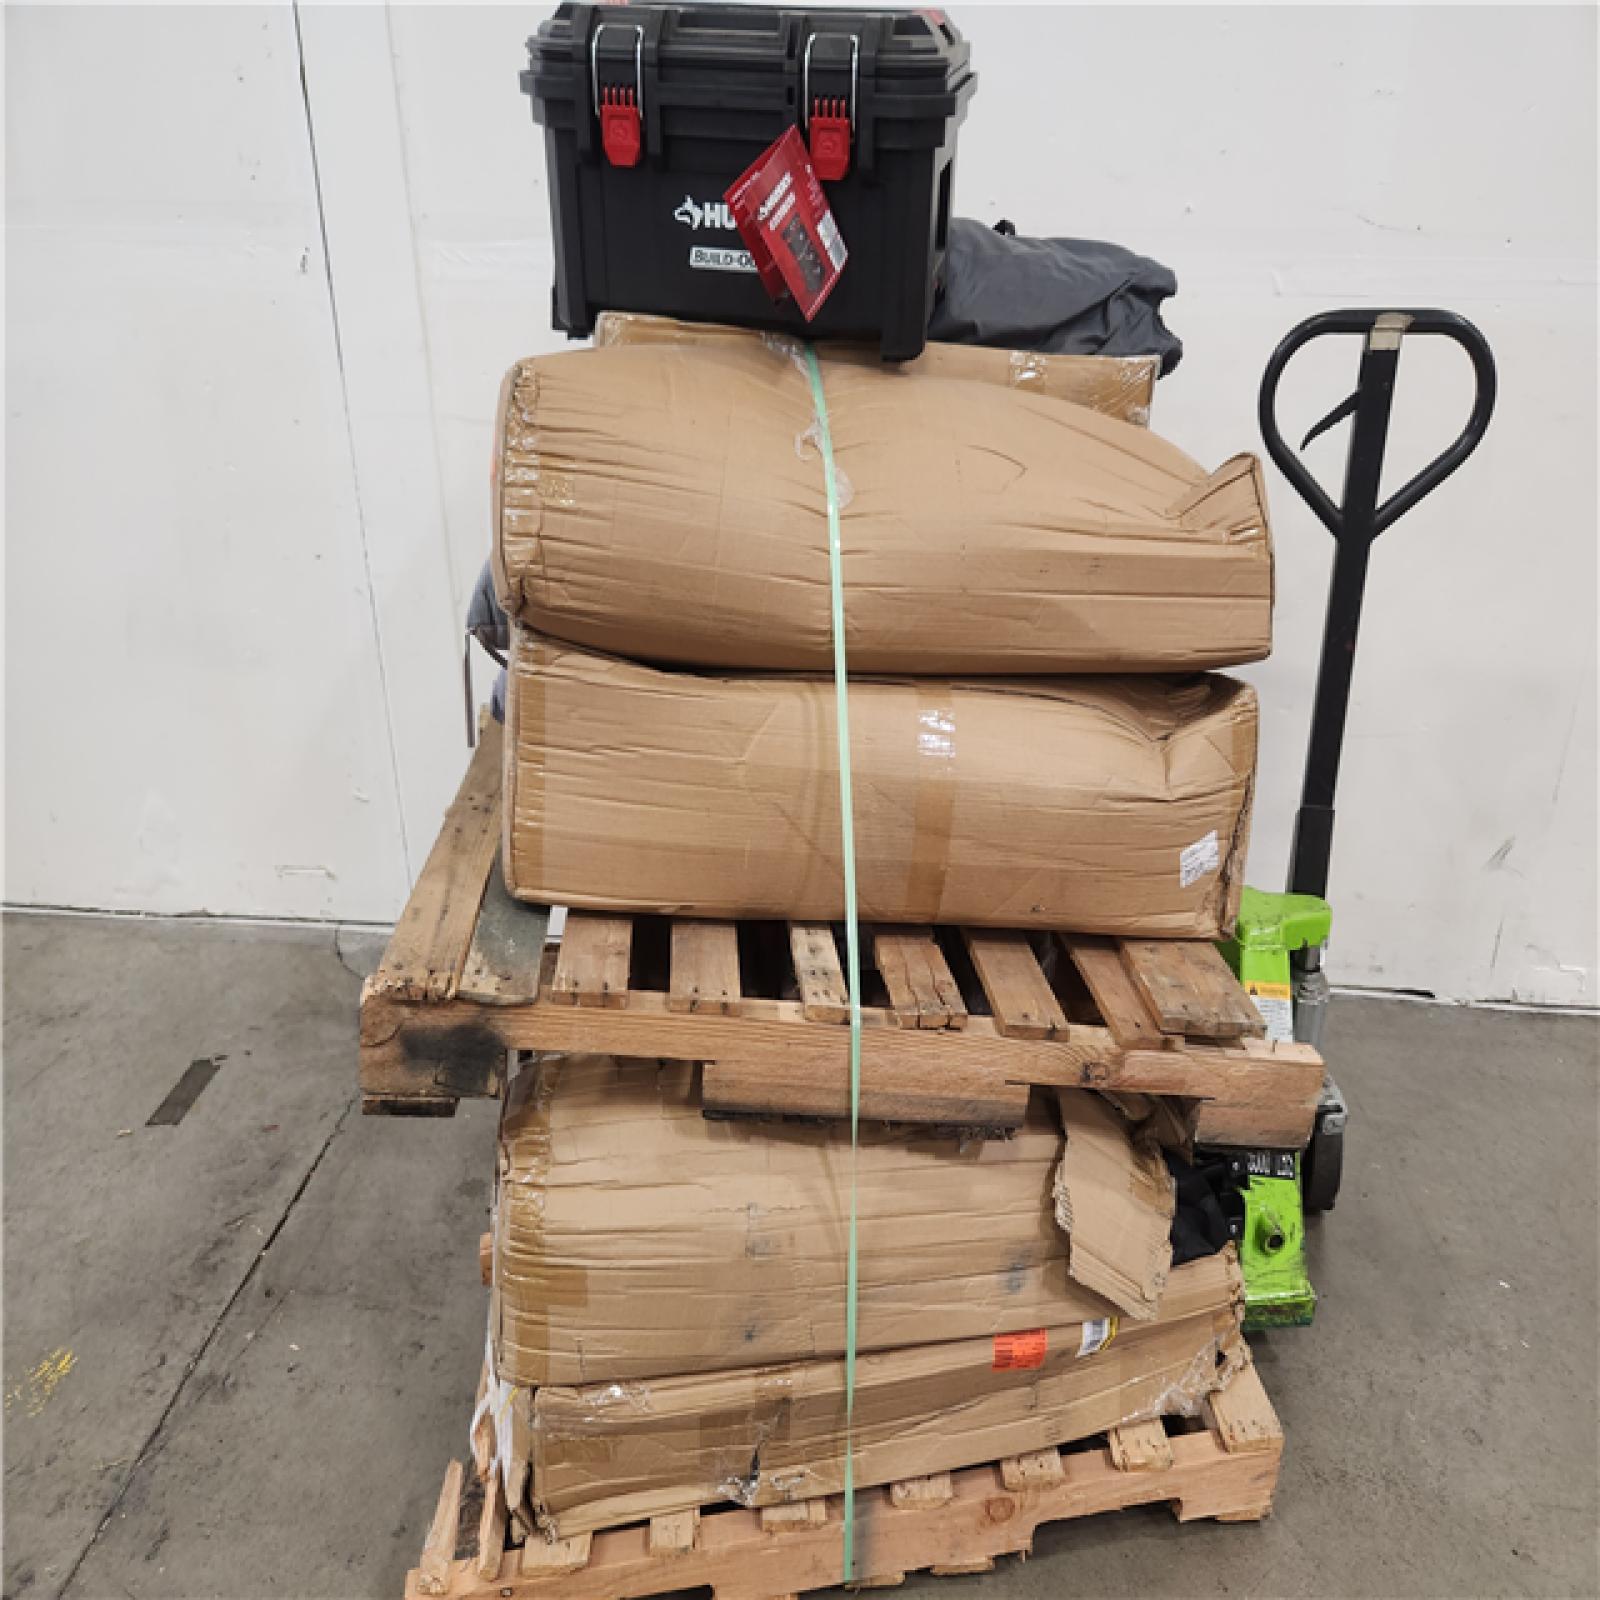 Phoenix Location Pallet of Assorted Folding Camping Chairs & More